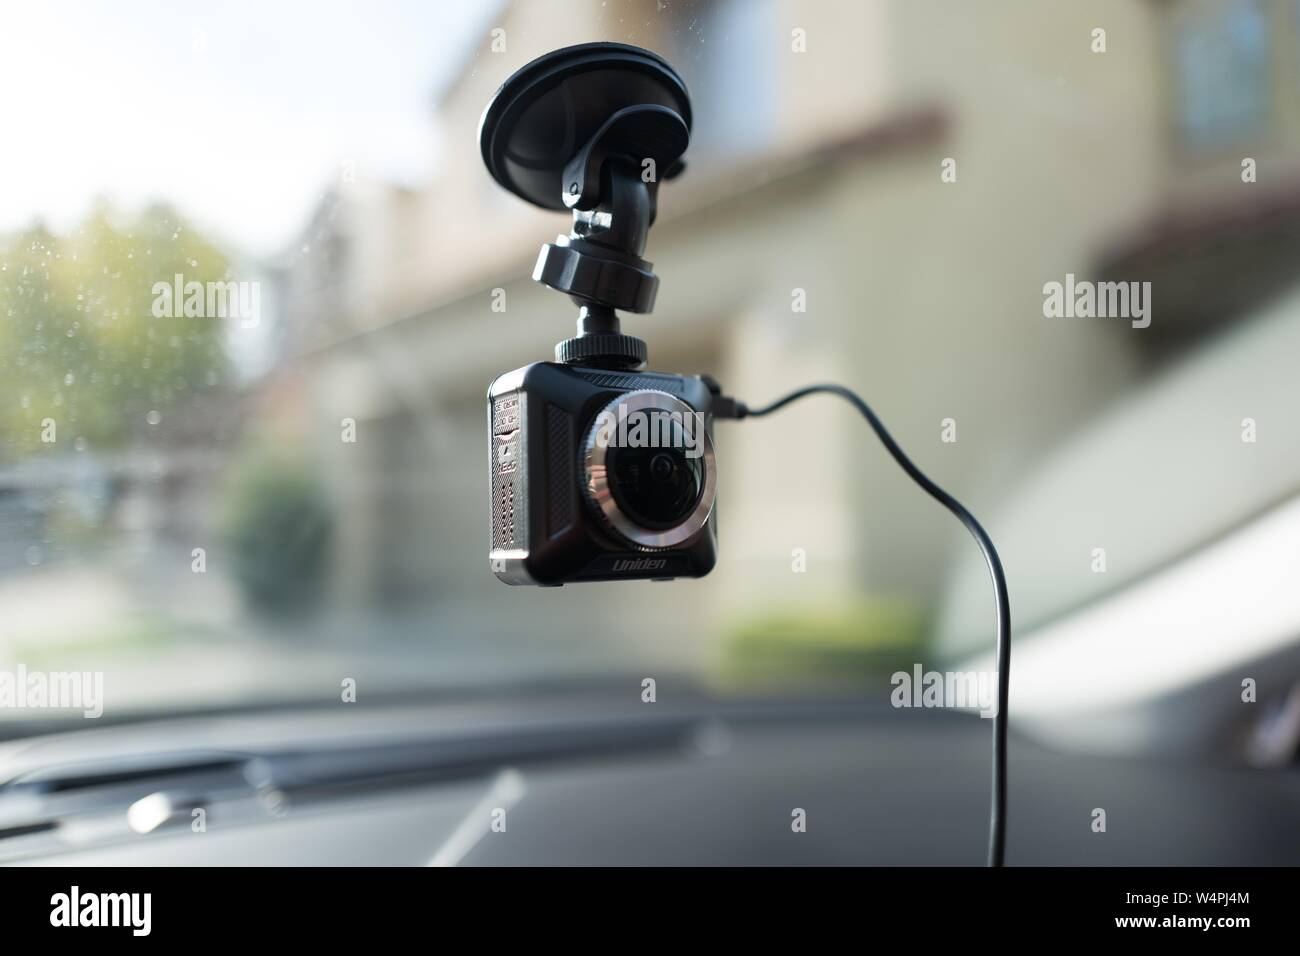 https://c8.alamy.com/comp/W4PJ4M/close-up-of-uniden-dashboard-camera-dashcam-installed-on-the-interior-window-of-an-uber-vehicle-in-san-ramon-california-dashcams-are-often-used-by-crowdsourced-taxi-drivers-to-increase-driver-and-passenger-safety-september-27-2018-W4PJ4M.jpg